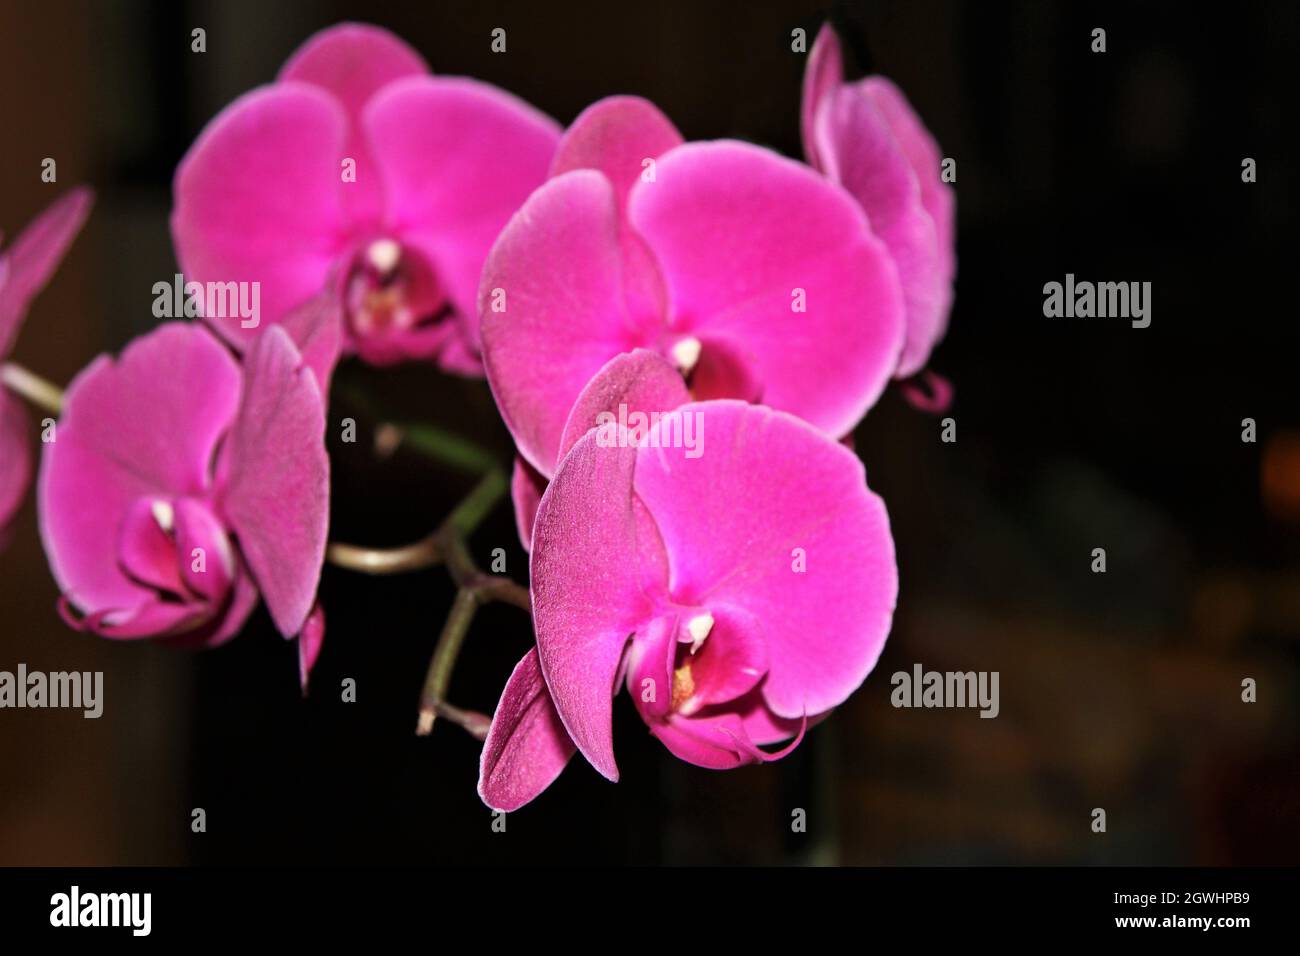 Pink orchid against a dark background Stock Photo